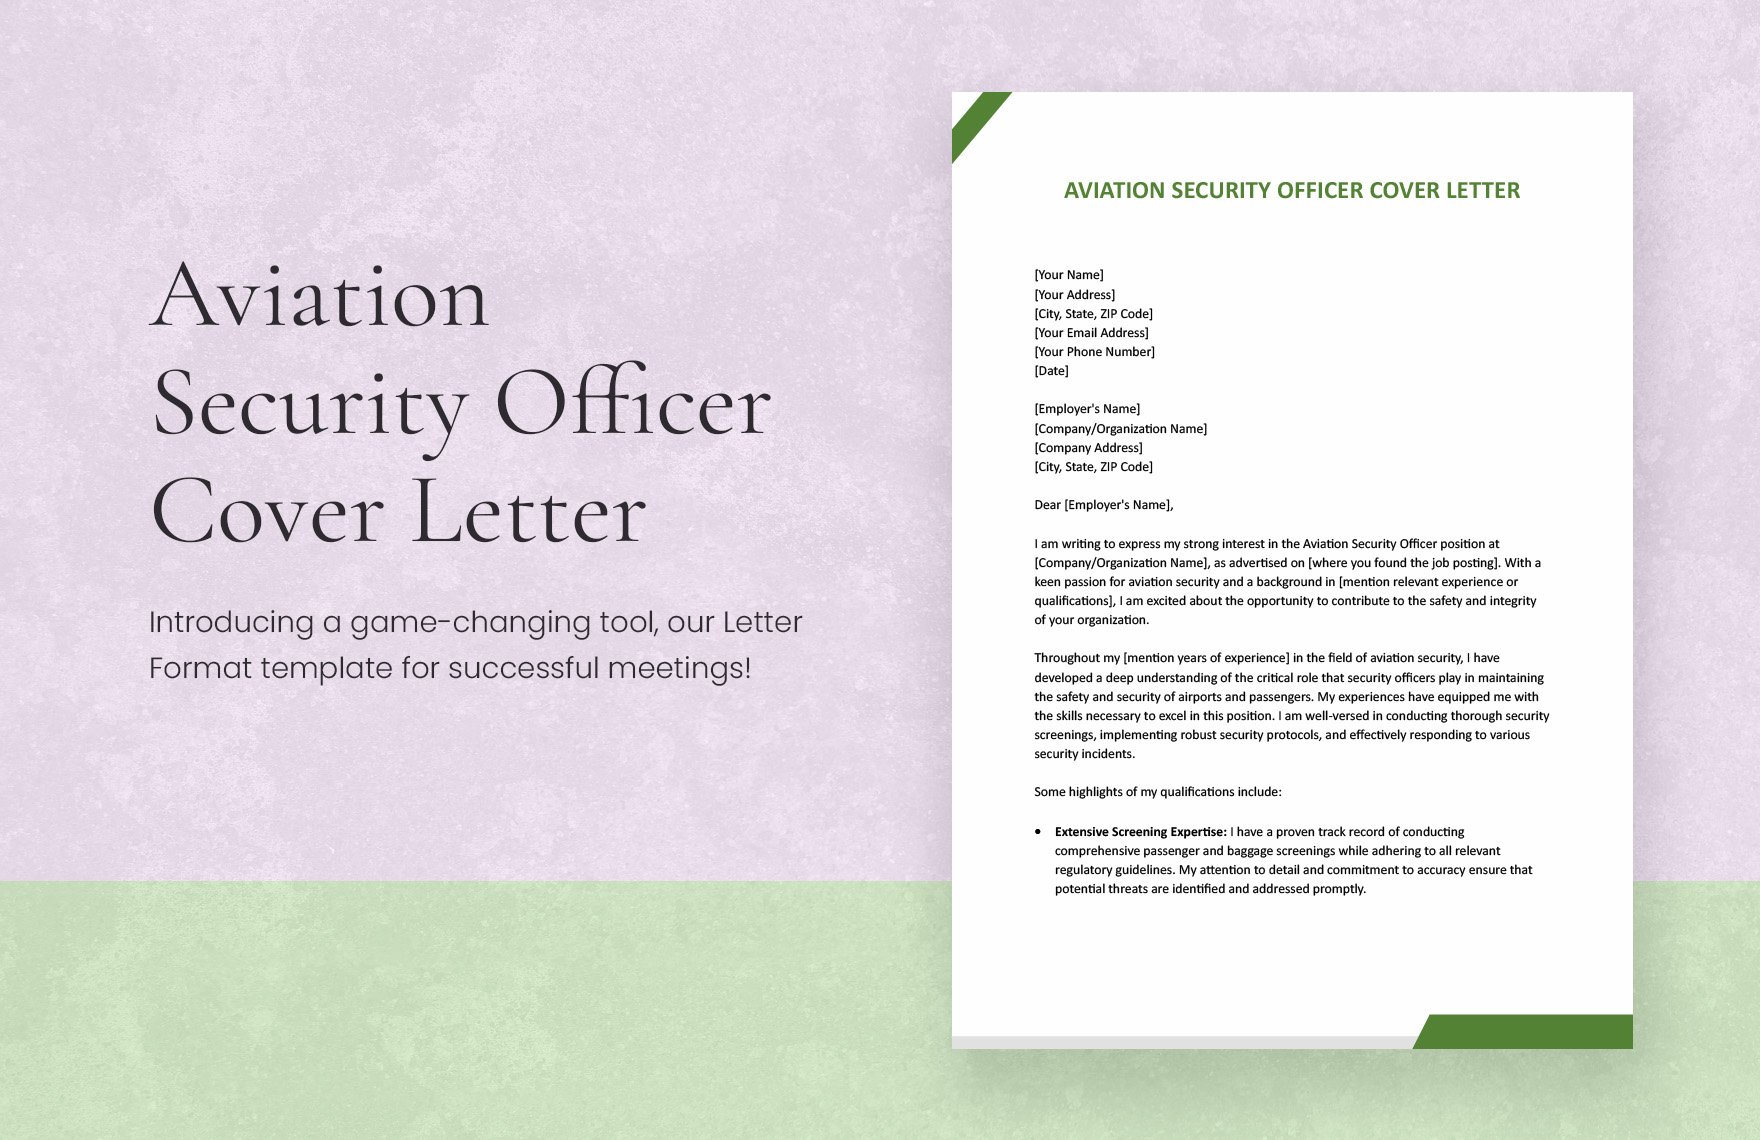 Aviation Security Officer Cover Letter